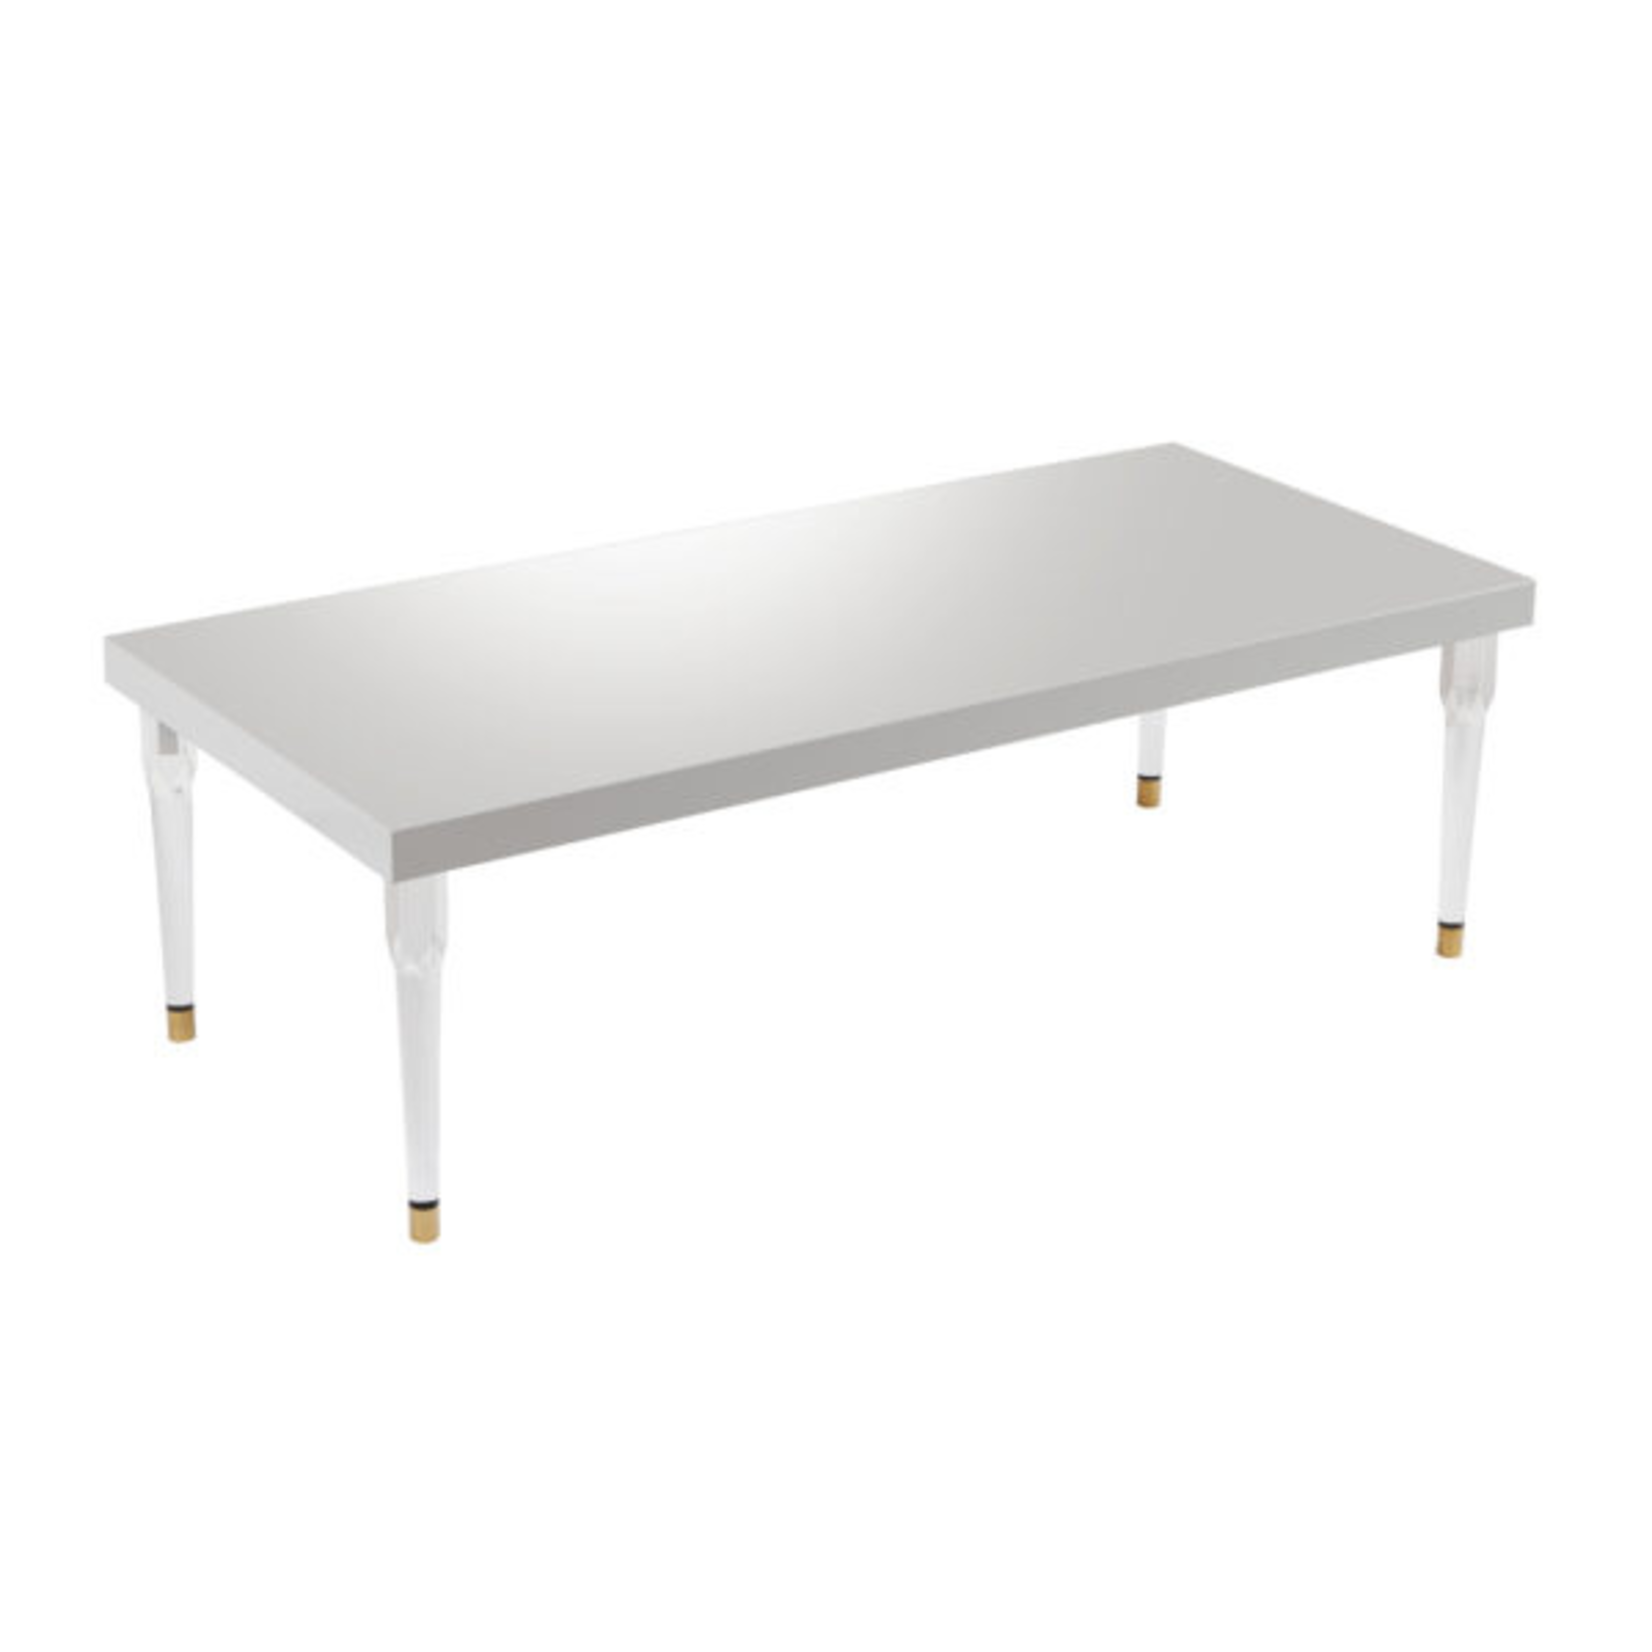 Tov ABBY GLOSSY LACQUER DINING TABLE